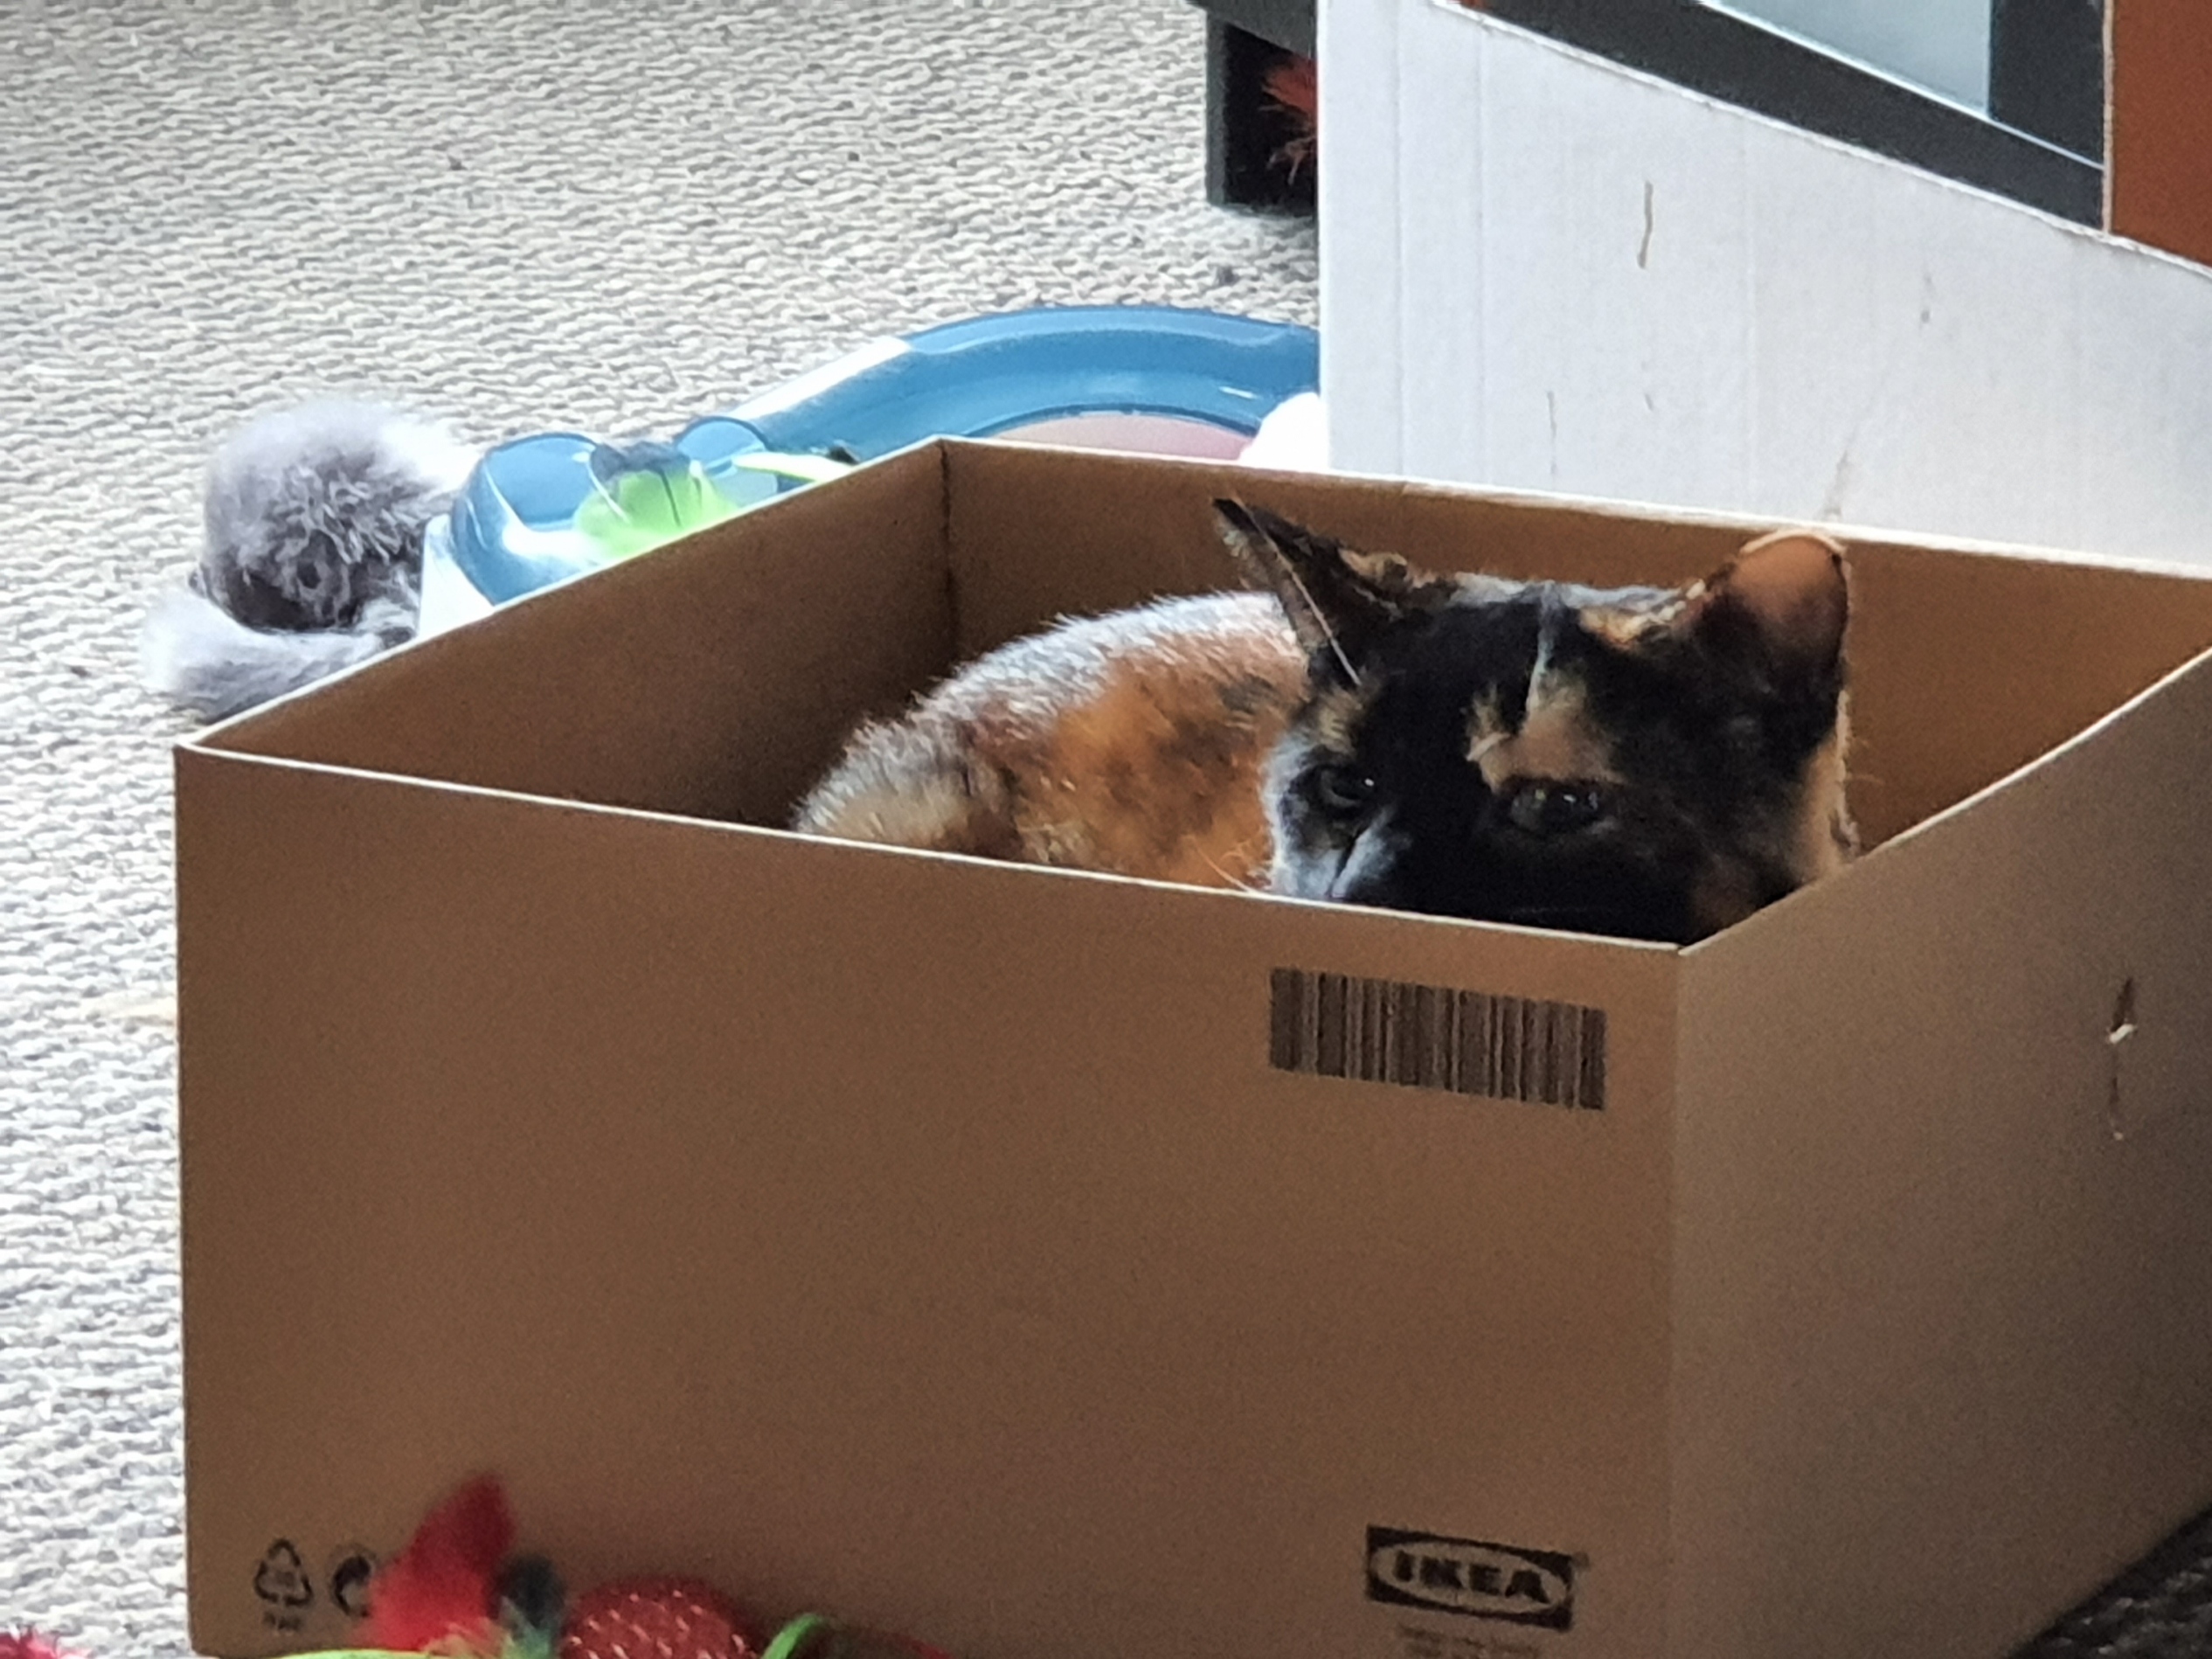 Brown calico cat sitting in a cardboard box, cat looking nosey